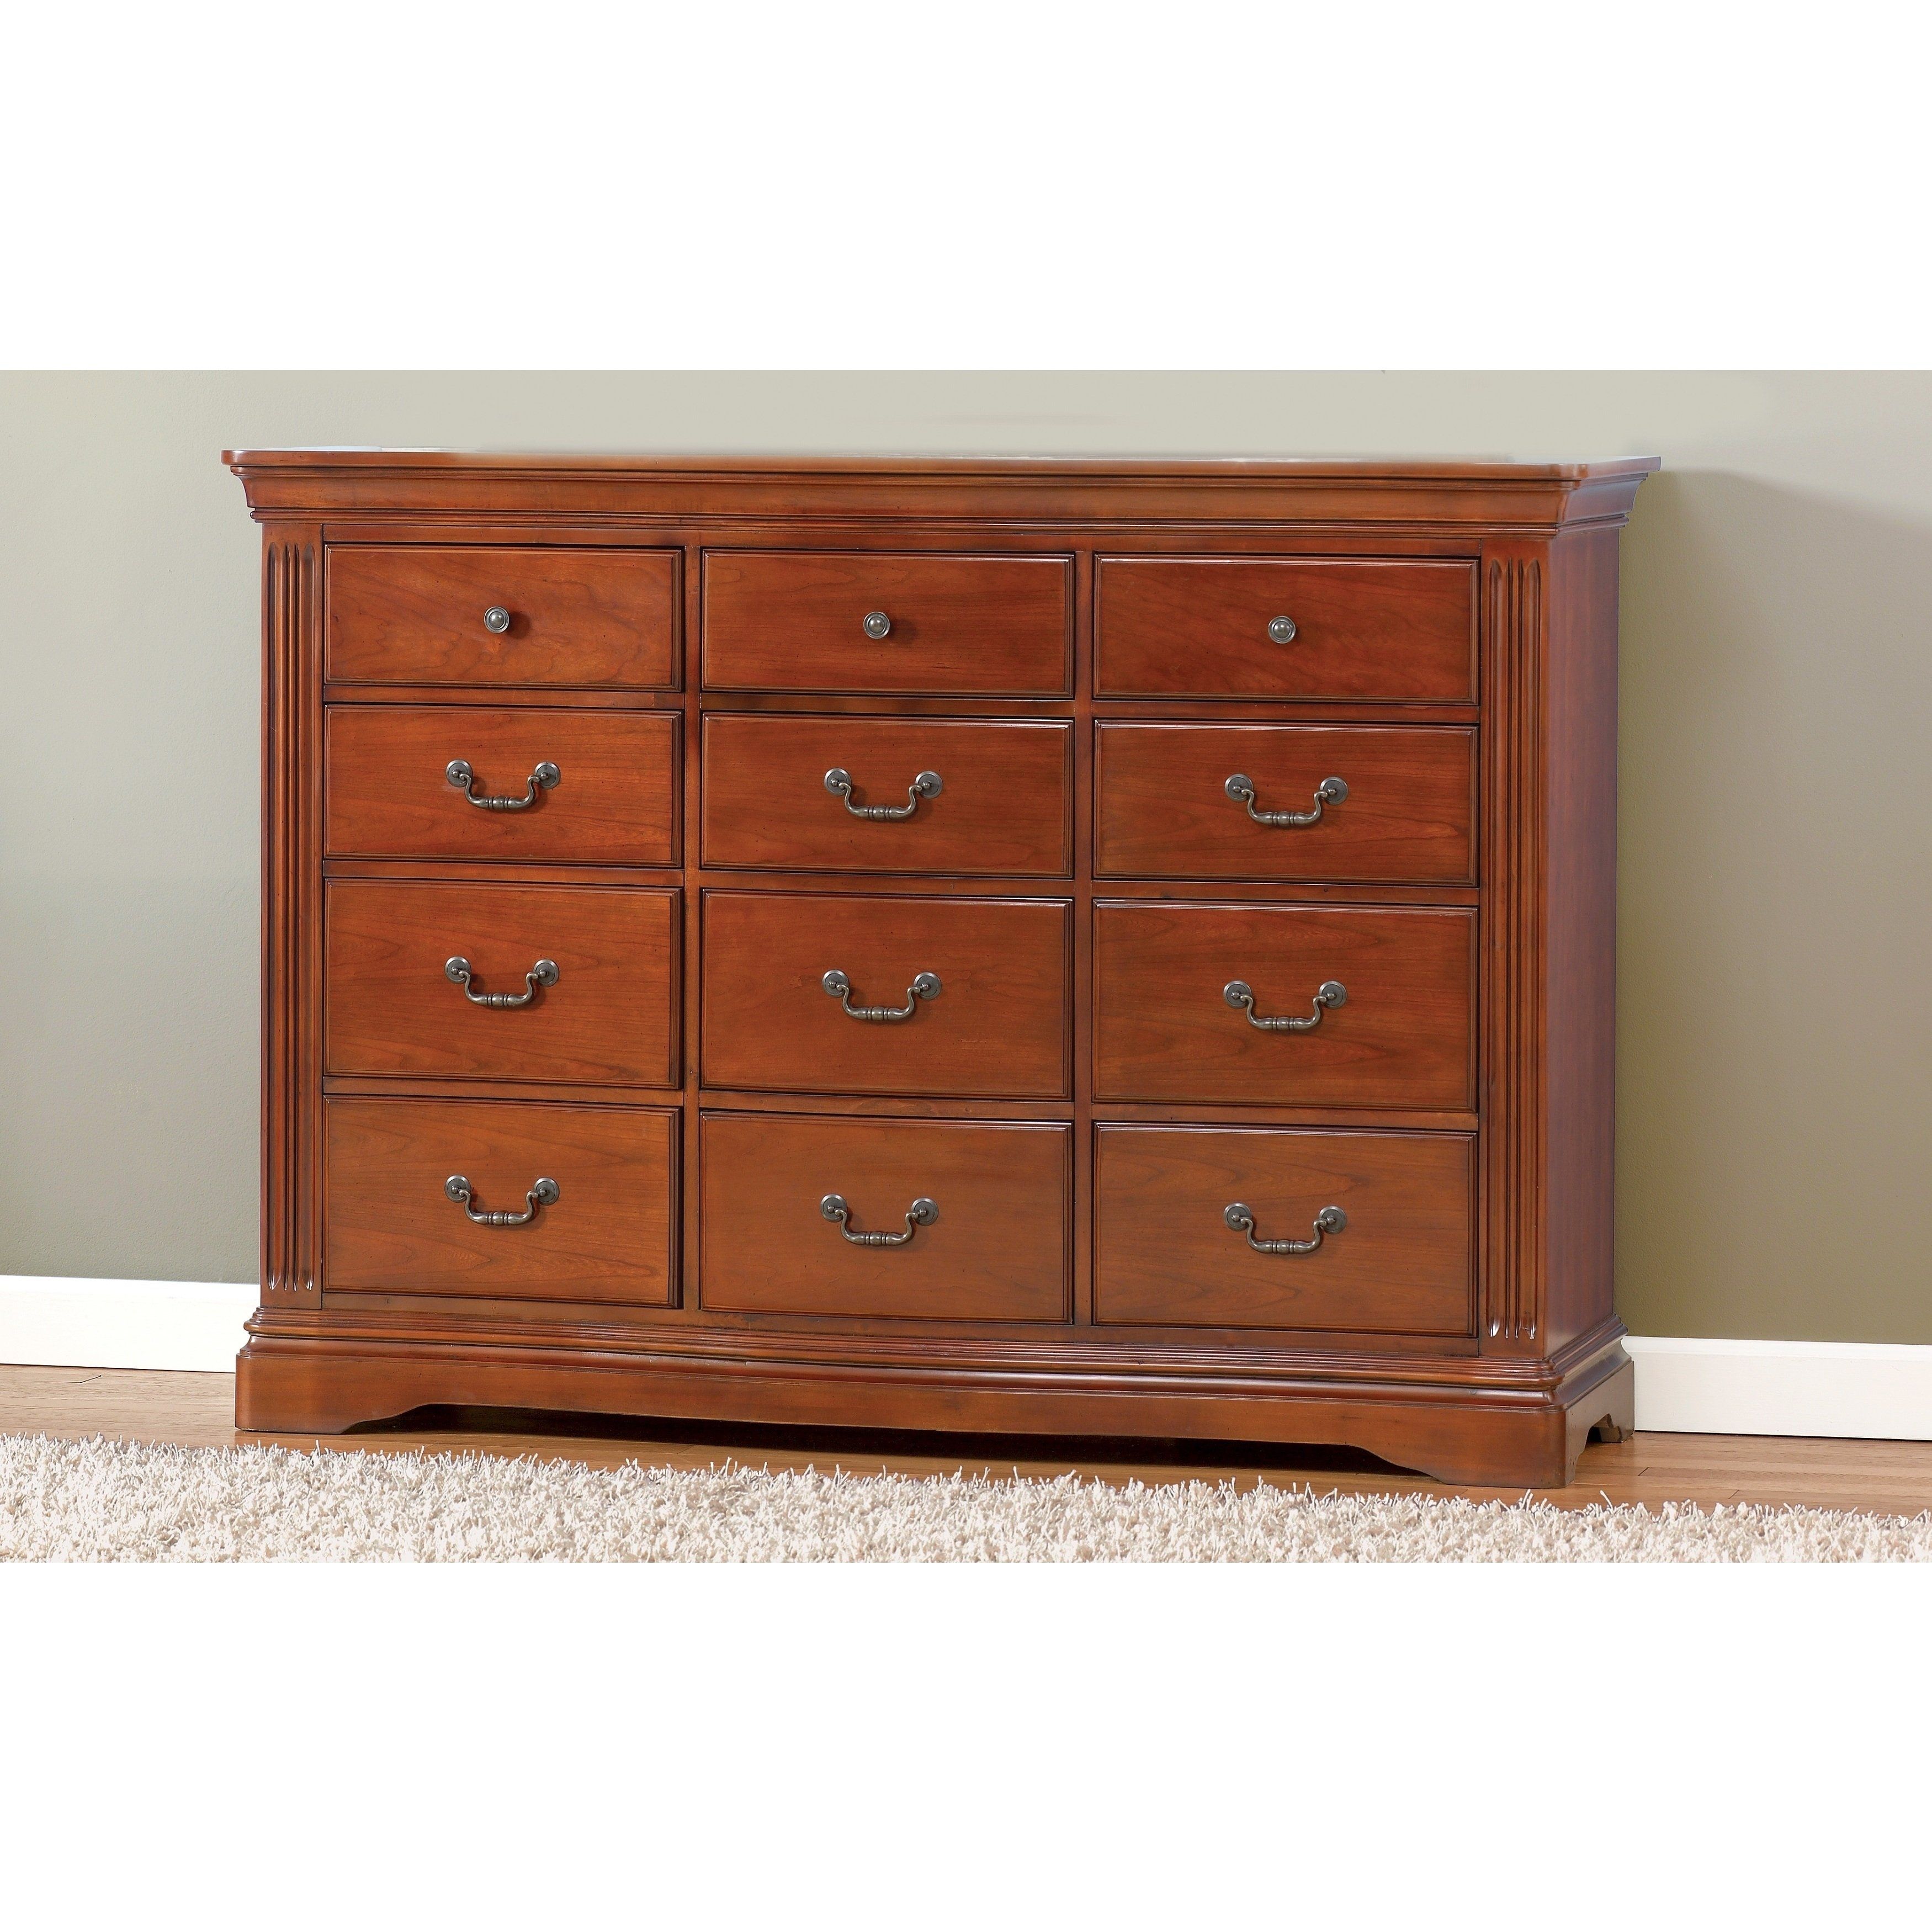 Greenbriar Ii Dresser Brown Cherry 12 Drawer – Free Shipping Today Within Candice Ii Sideboards (View 25 of 30)